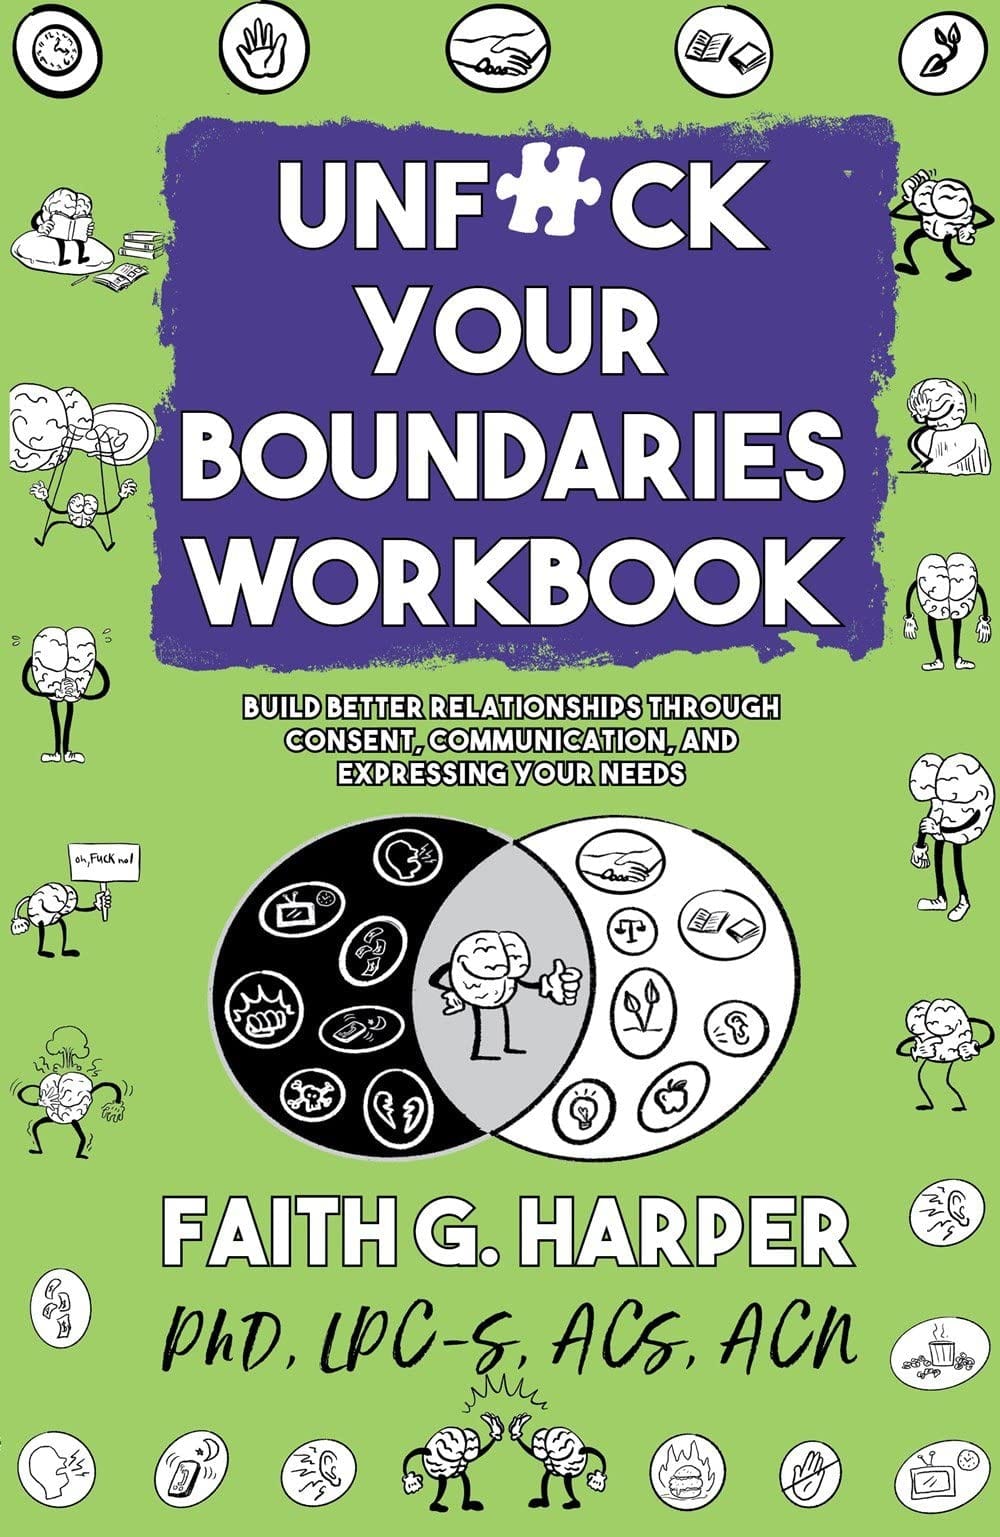 Unf#ck Your Boundaries Workbook: Build Better Relationships Through Consent Communication and Expressing Your Needs - Third Eye